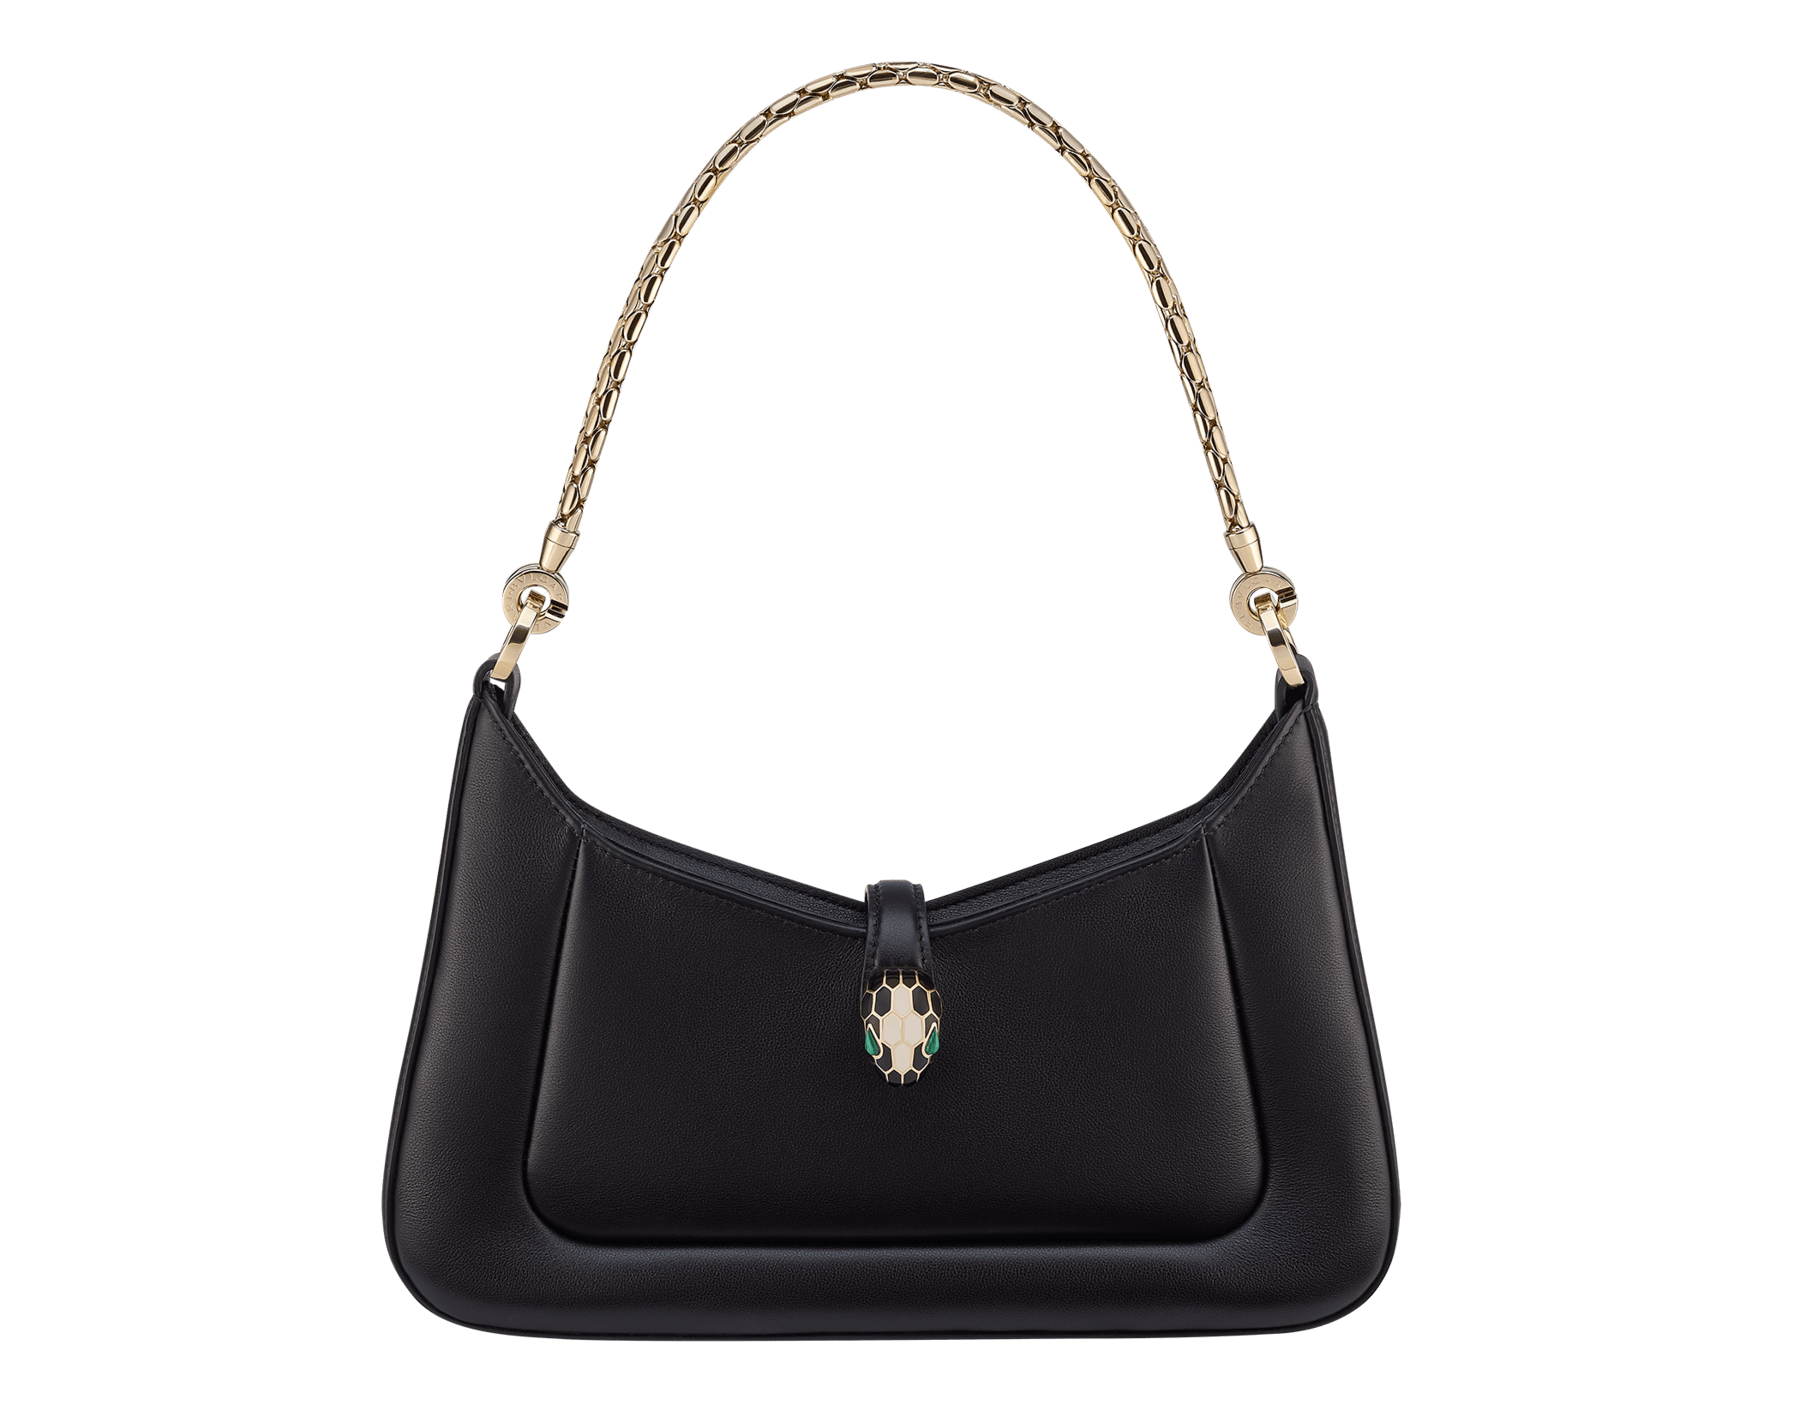 Serpenti Baia small shoulder bag in vivid emerald green Metropolitan calf leather with black nappa leather lining. Captivating snakehead magnetic closure in light gold-plated brass embellished with bright forest emerald green enamel and light gold-plated brass scales, and black onyx eyes; additional zipped top closure. SEA-1274293589 image 1